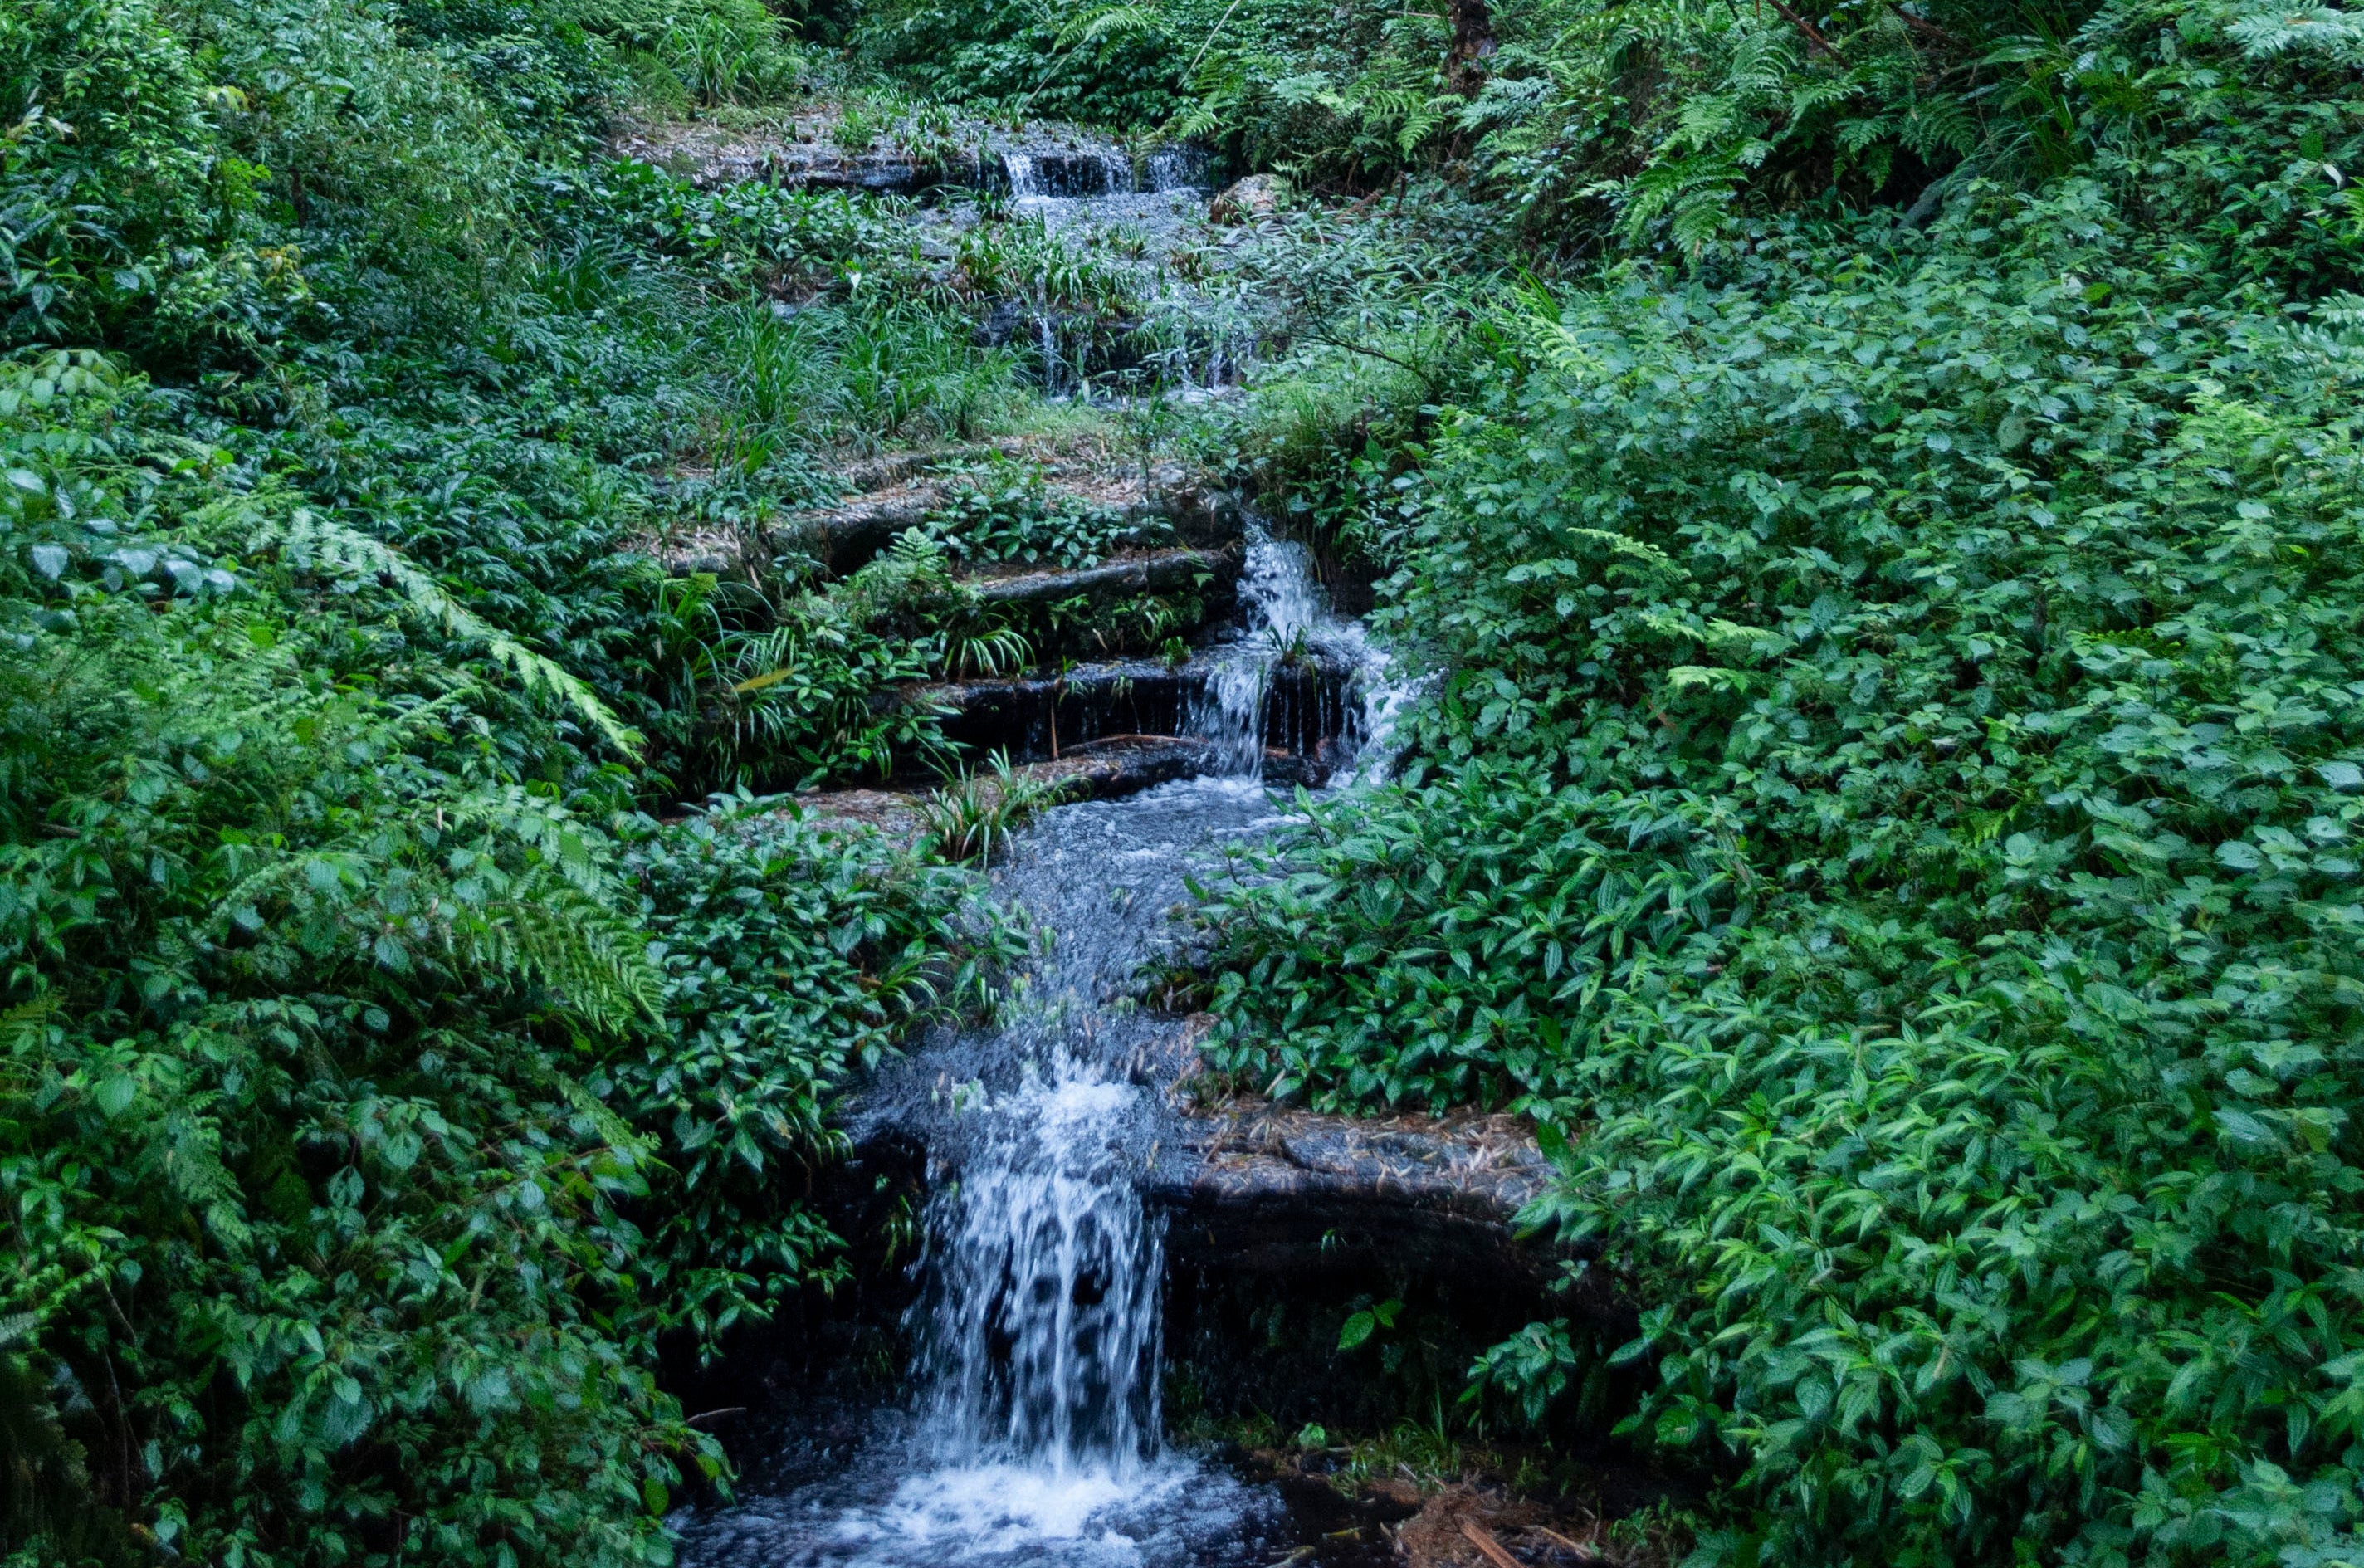 A small waterfall in a lush bamboo forest.